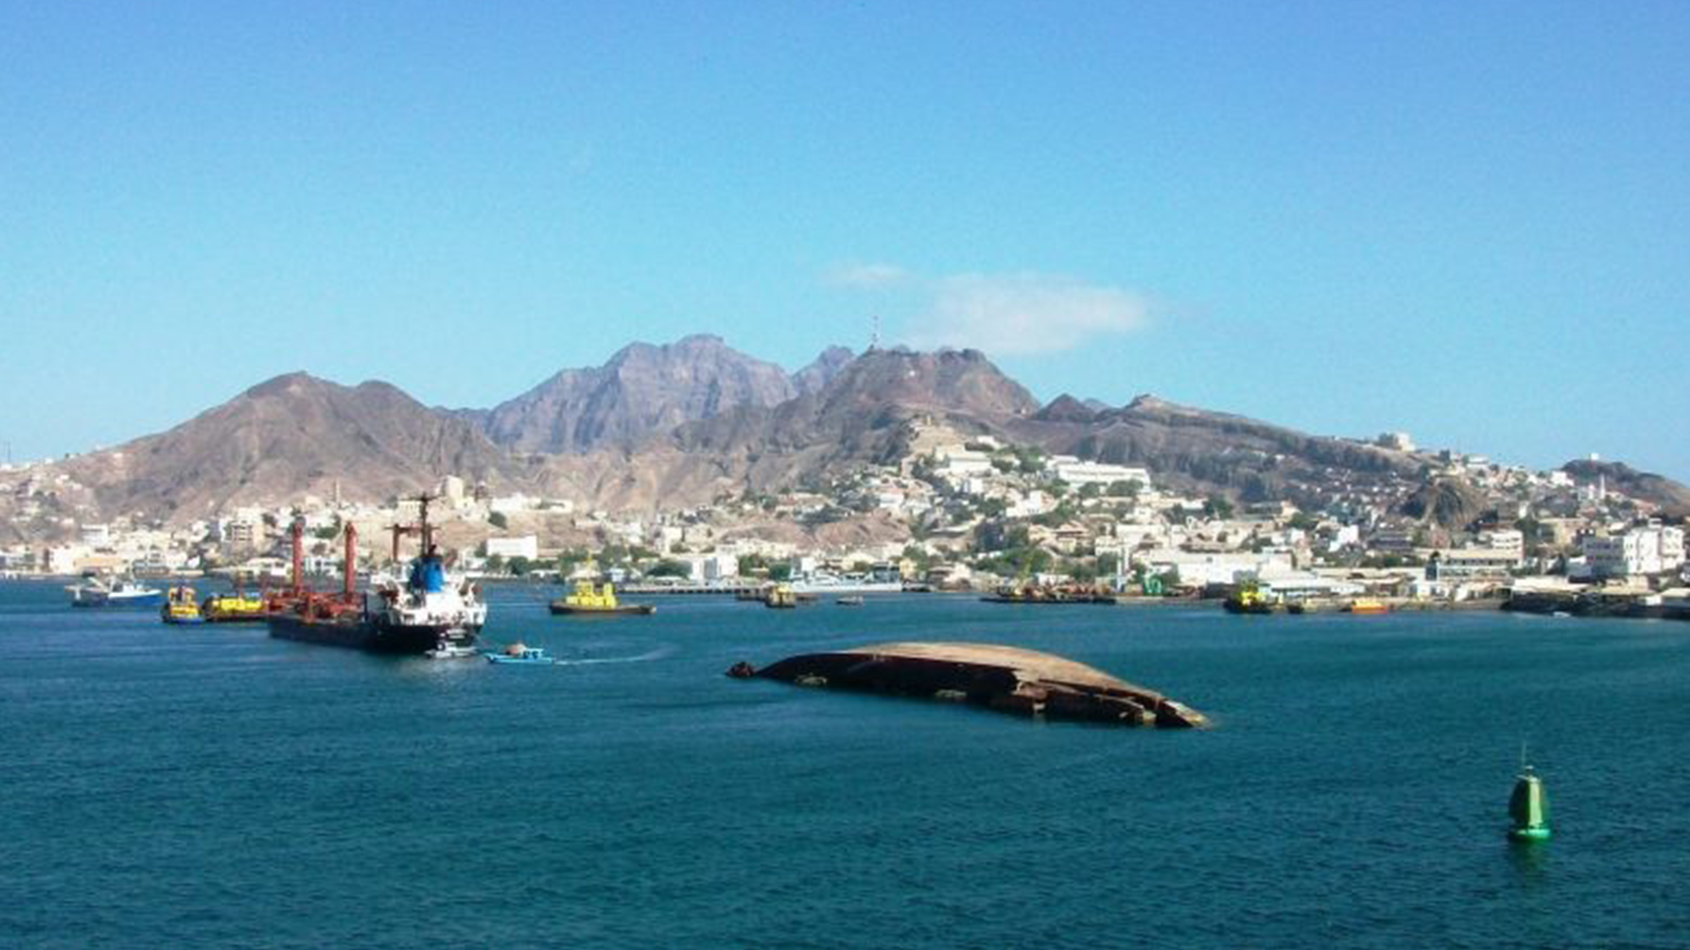 By the time the MV Mako was docked in the Port of Aden, Yemen, a seafarer had been on board for twelve months - nine of them unpaid.